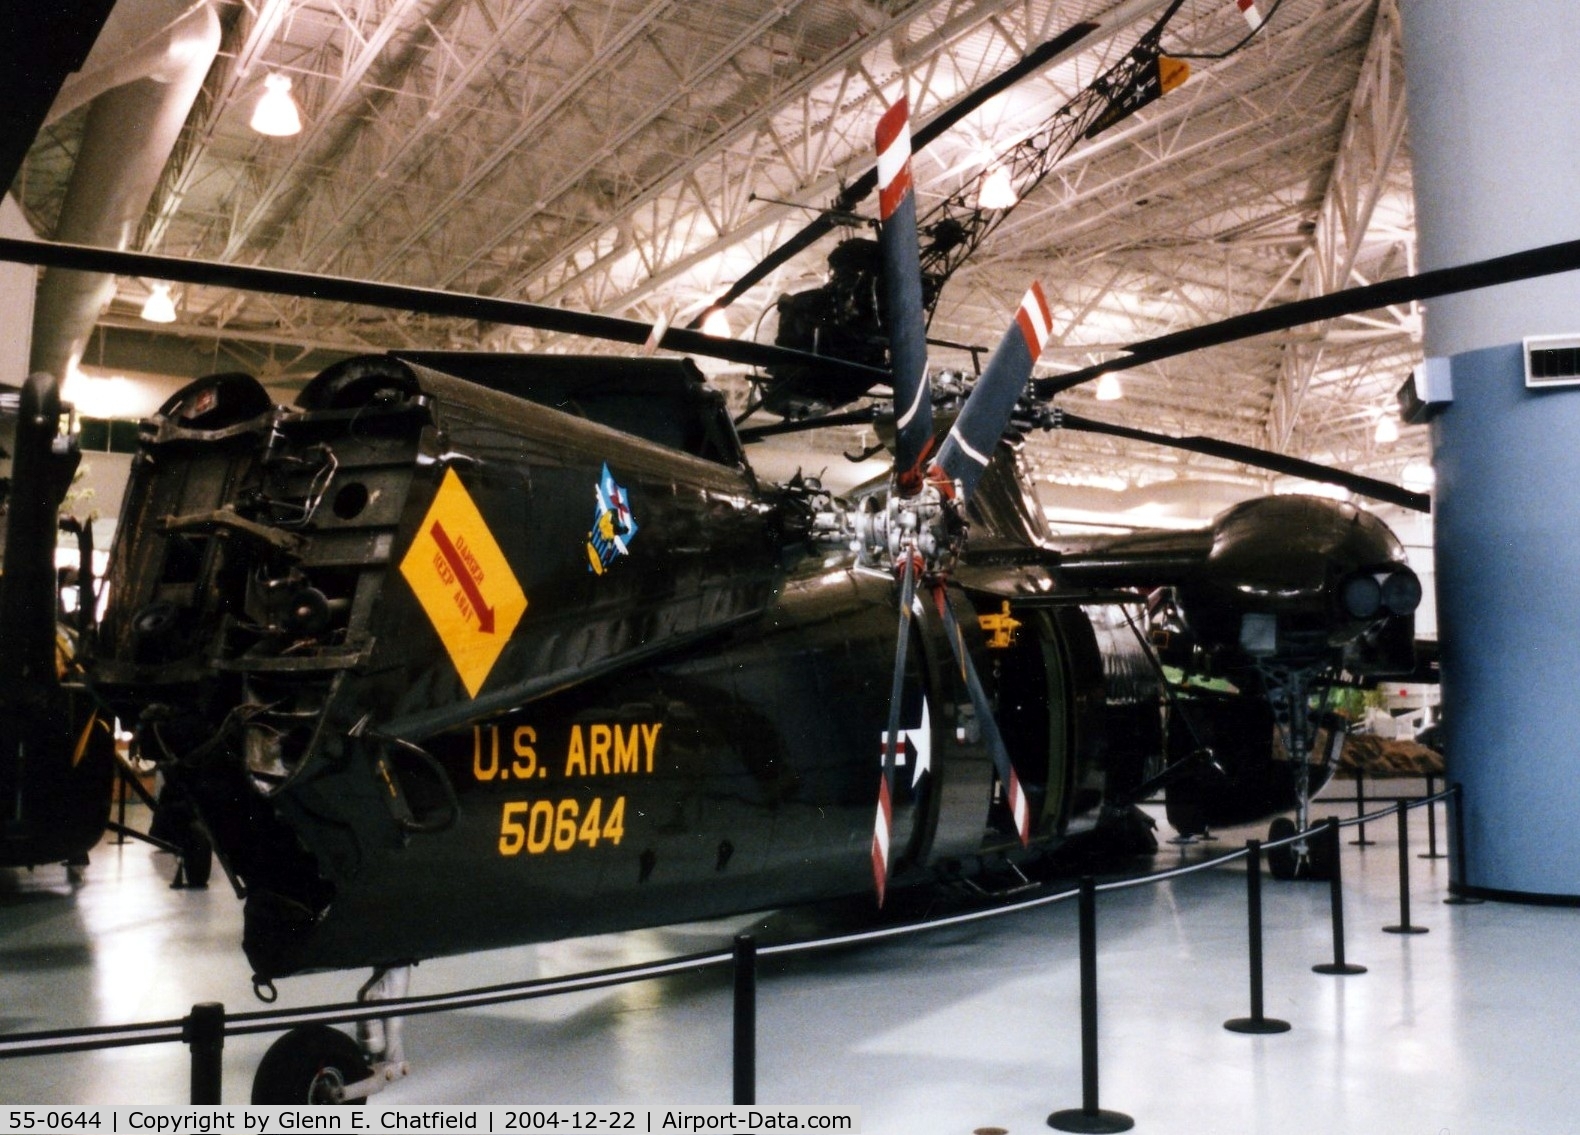 55-0644, 1955 Sikorsky CH-37B Mojave (S-56) C/N 56-031, CH-37A Mojave at the Army Aviation Museum